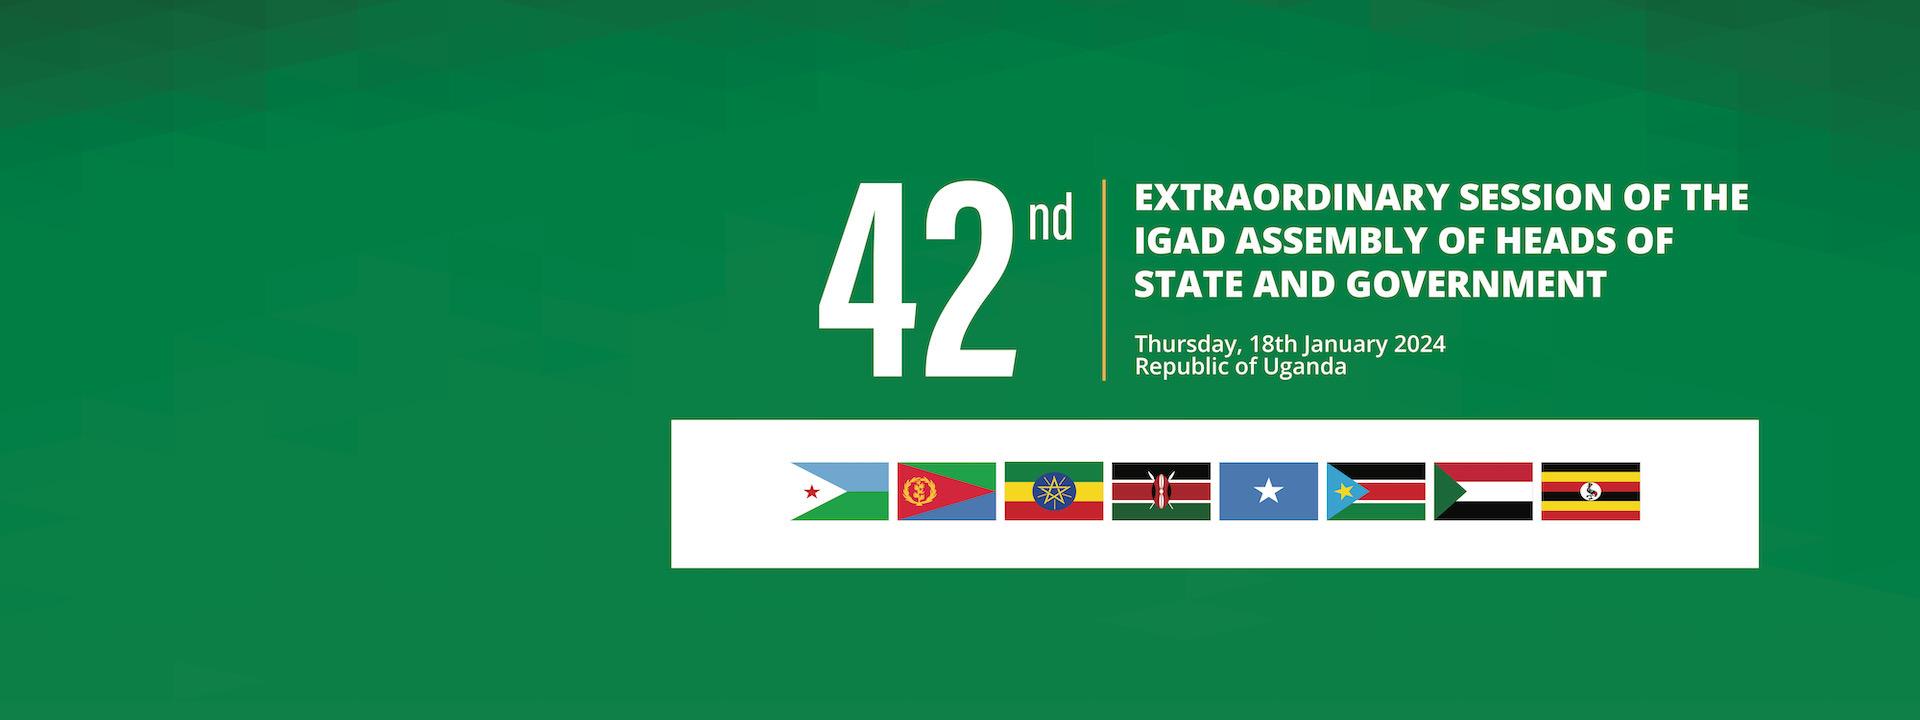 The 42nd ExtraOrdinary Session of the IGAD Assembly of Heads of State and Government